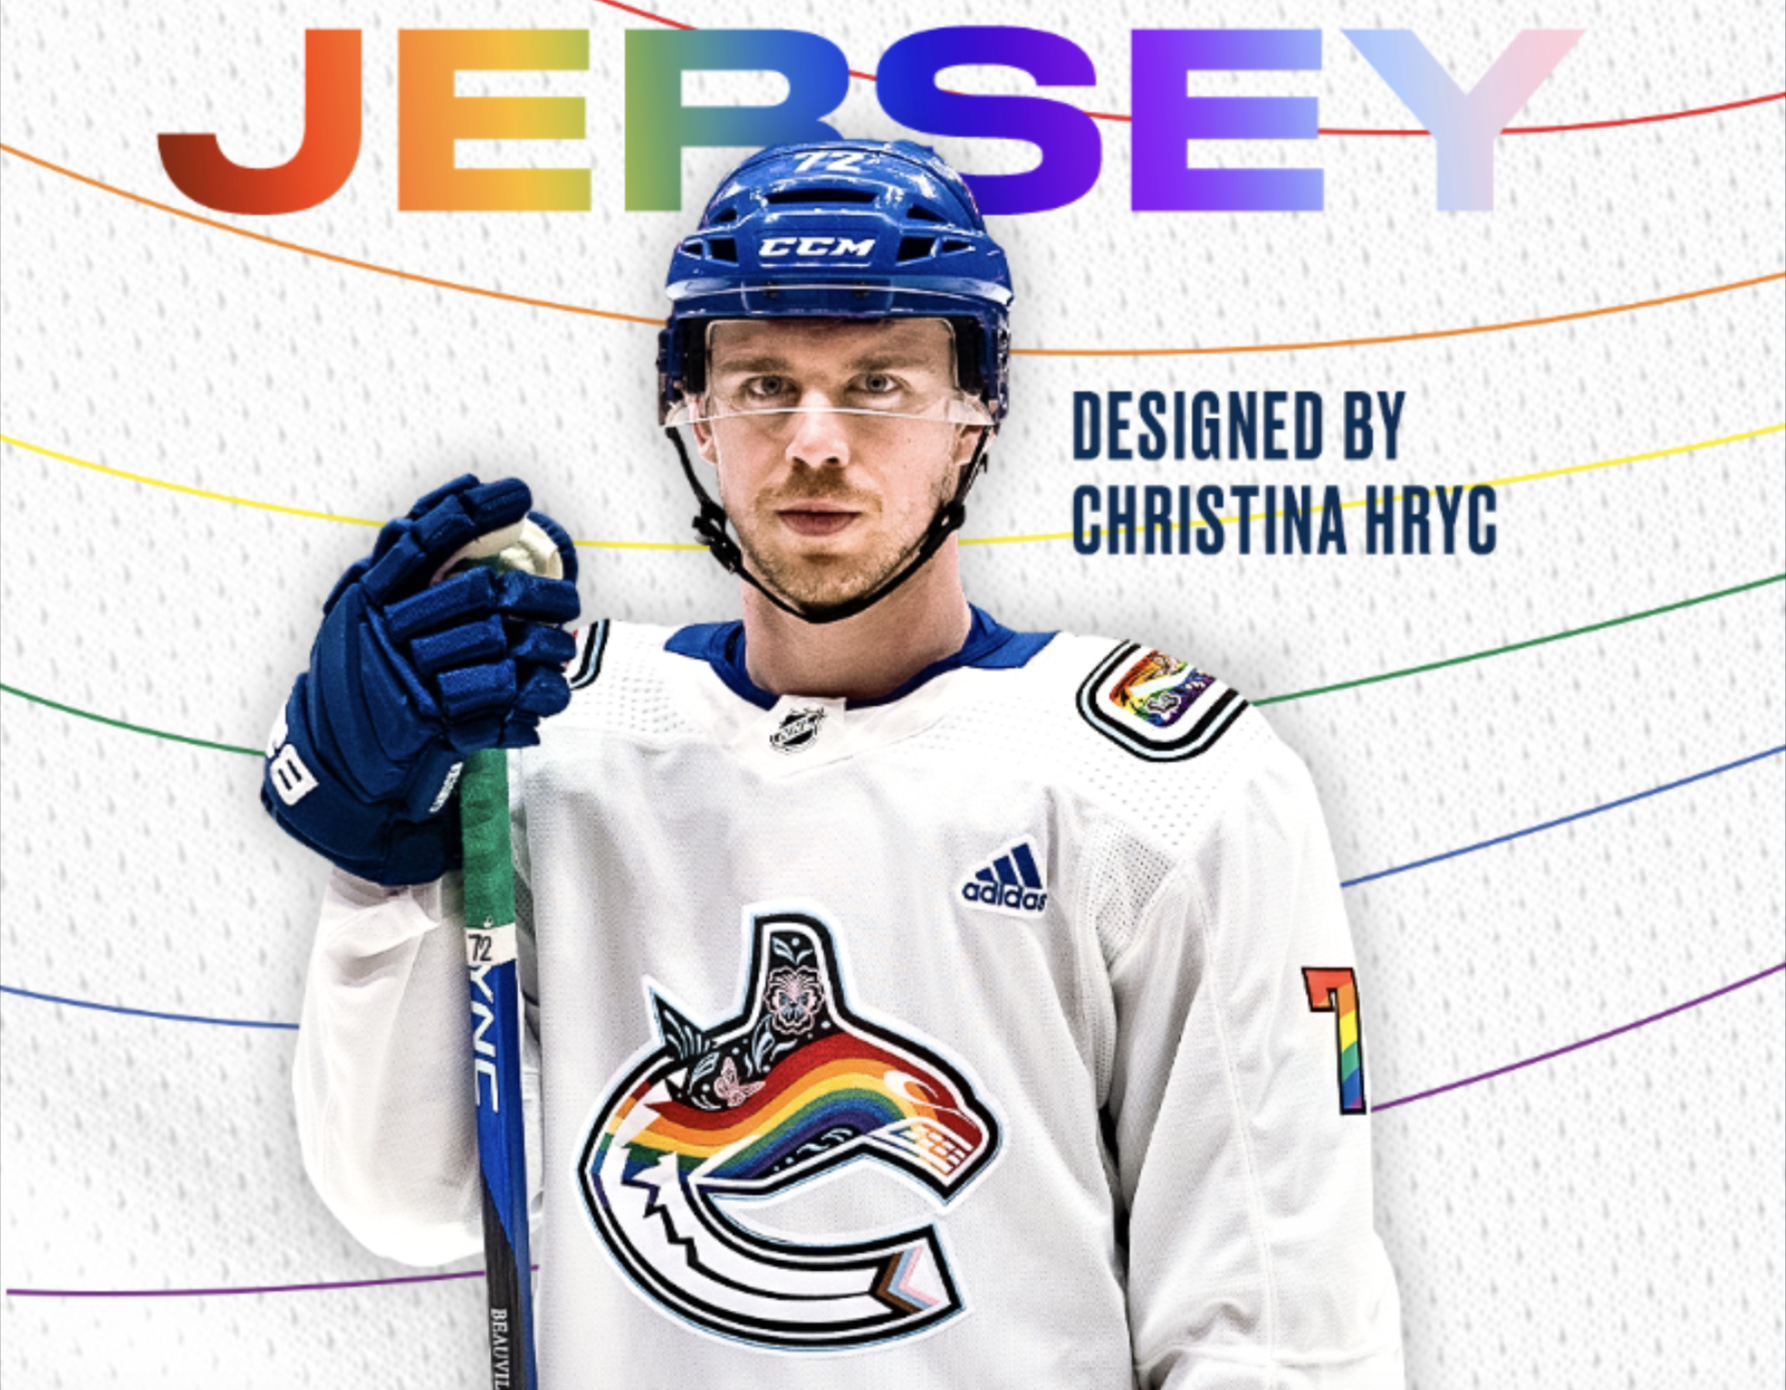 Vancouver Canucks Personalized New LGBT Pride Jersey Shirt Hoodie